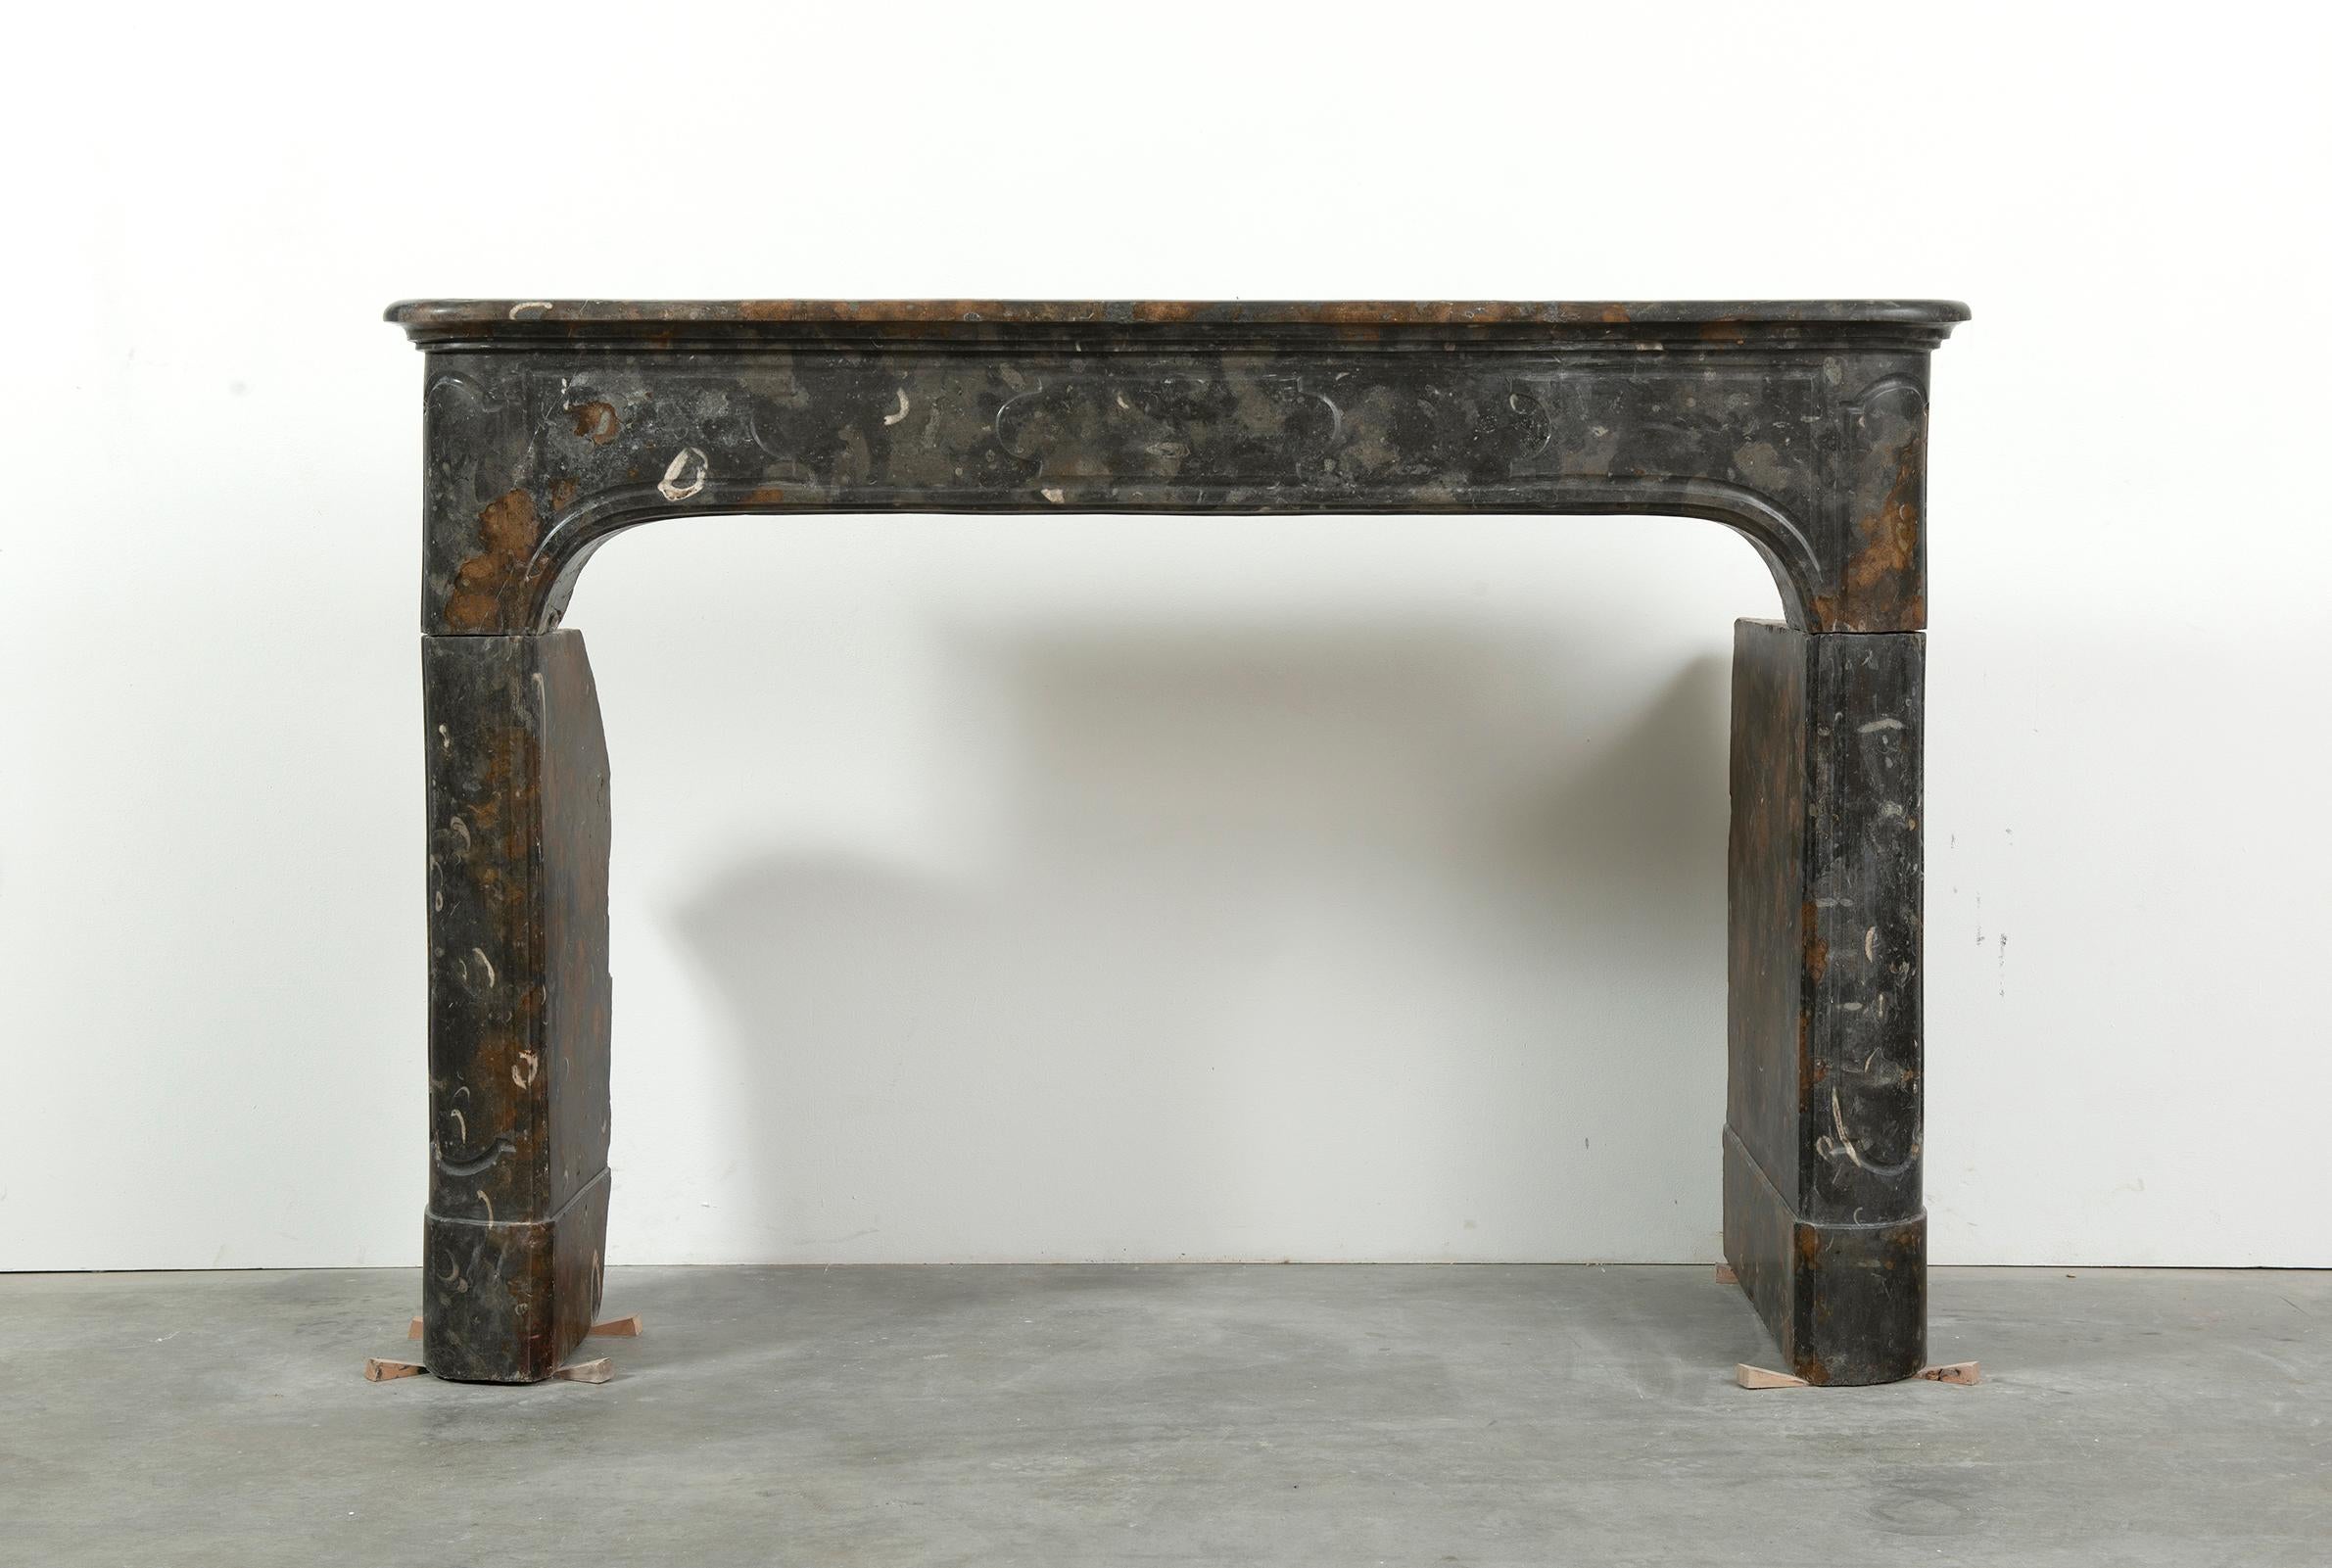 Very elegant 18th century French Louis XIV Fireplace mantel in striking limestone from Saint- Cyr.

This dark limestone/marble show amazing pre historic fossils combined with clouds of grey and hints of white an warm yellow.
The amazing patina